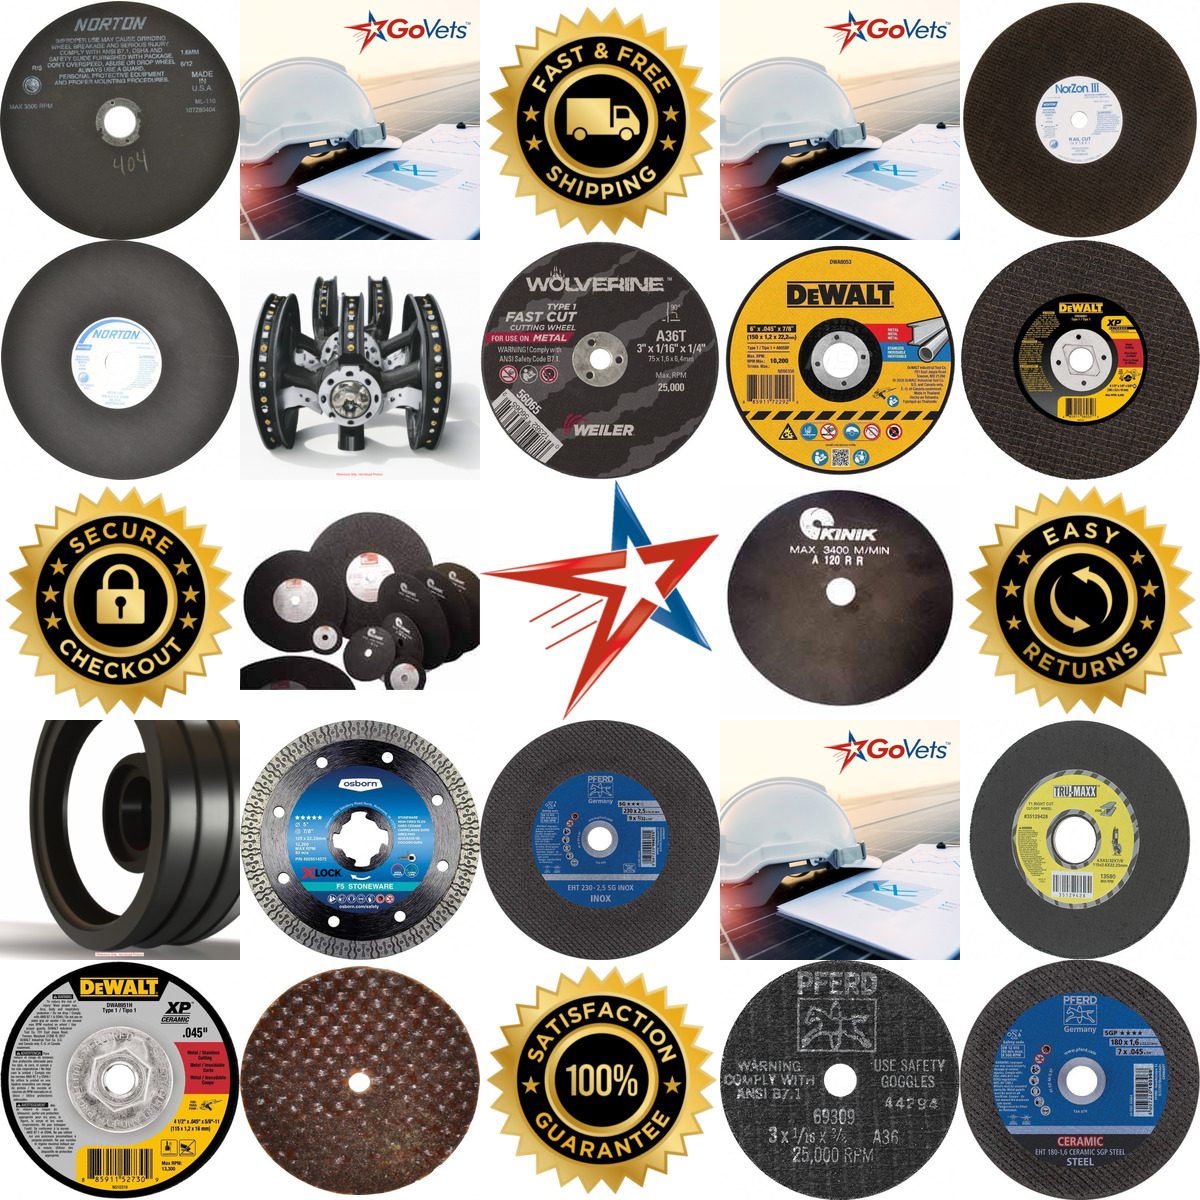 A selection of Cutoff Wheels products on GoVets